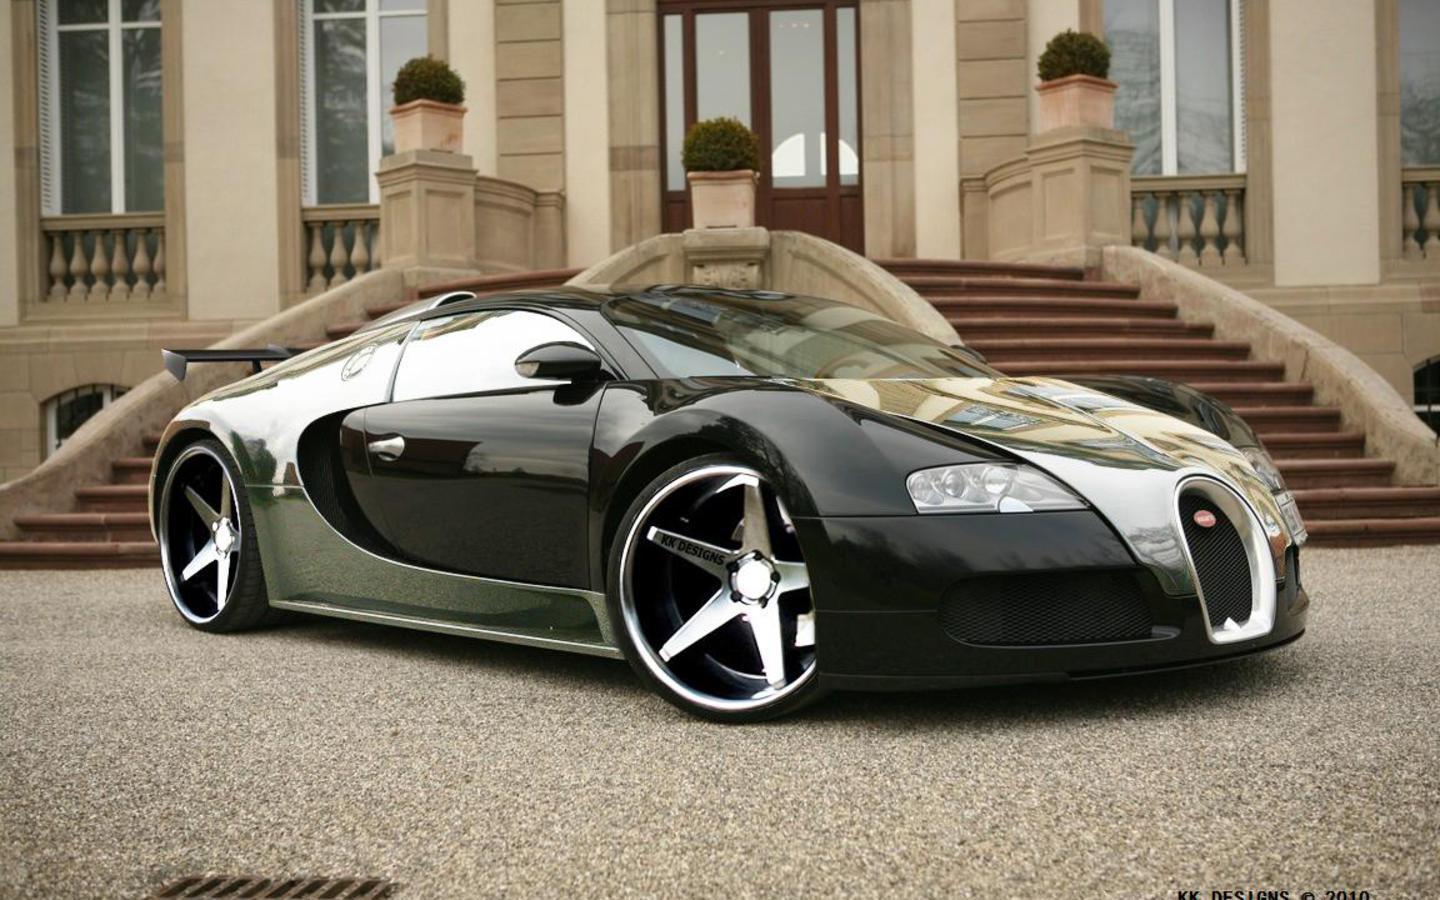 Nothing found for New Bugatti Veyron Wallpaper HD Onlybackground